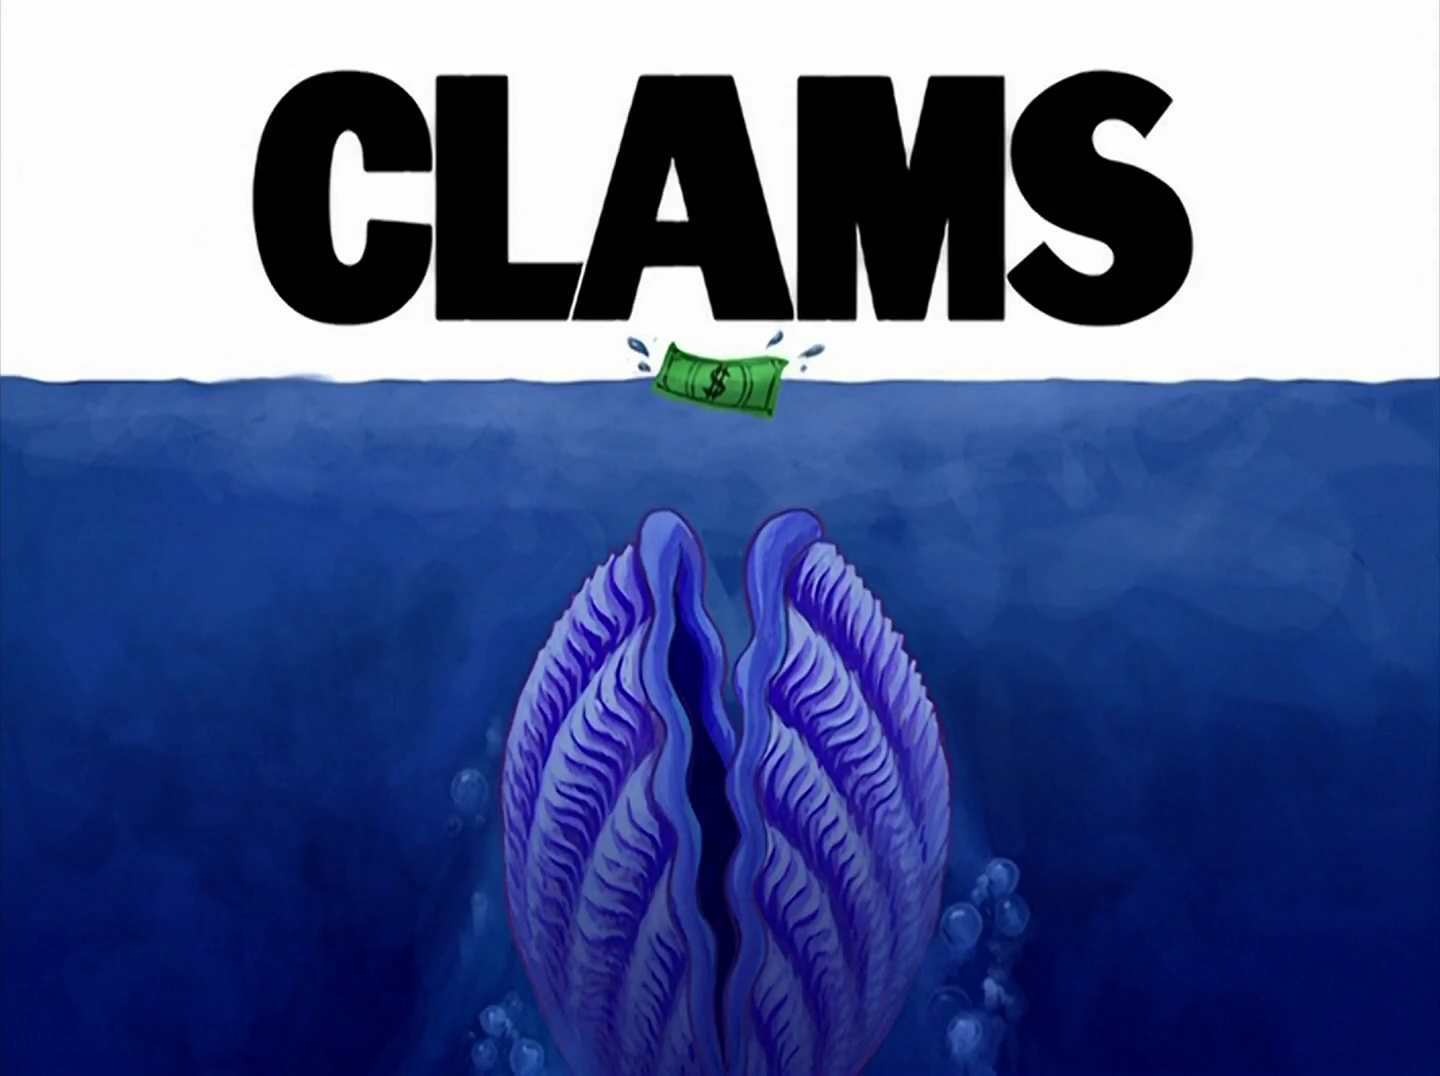 Clams (SpongeBob SquarePants episode), TV Shows and Movies Wiki